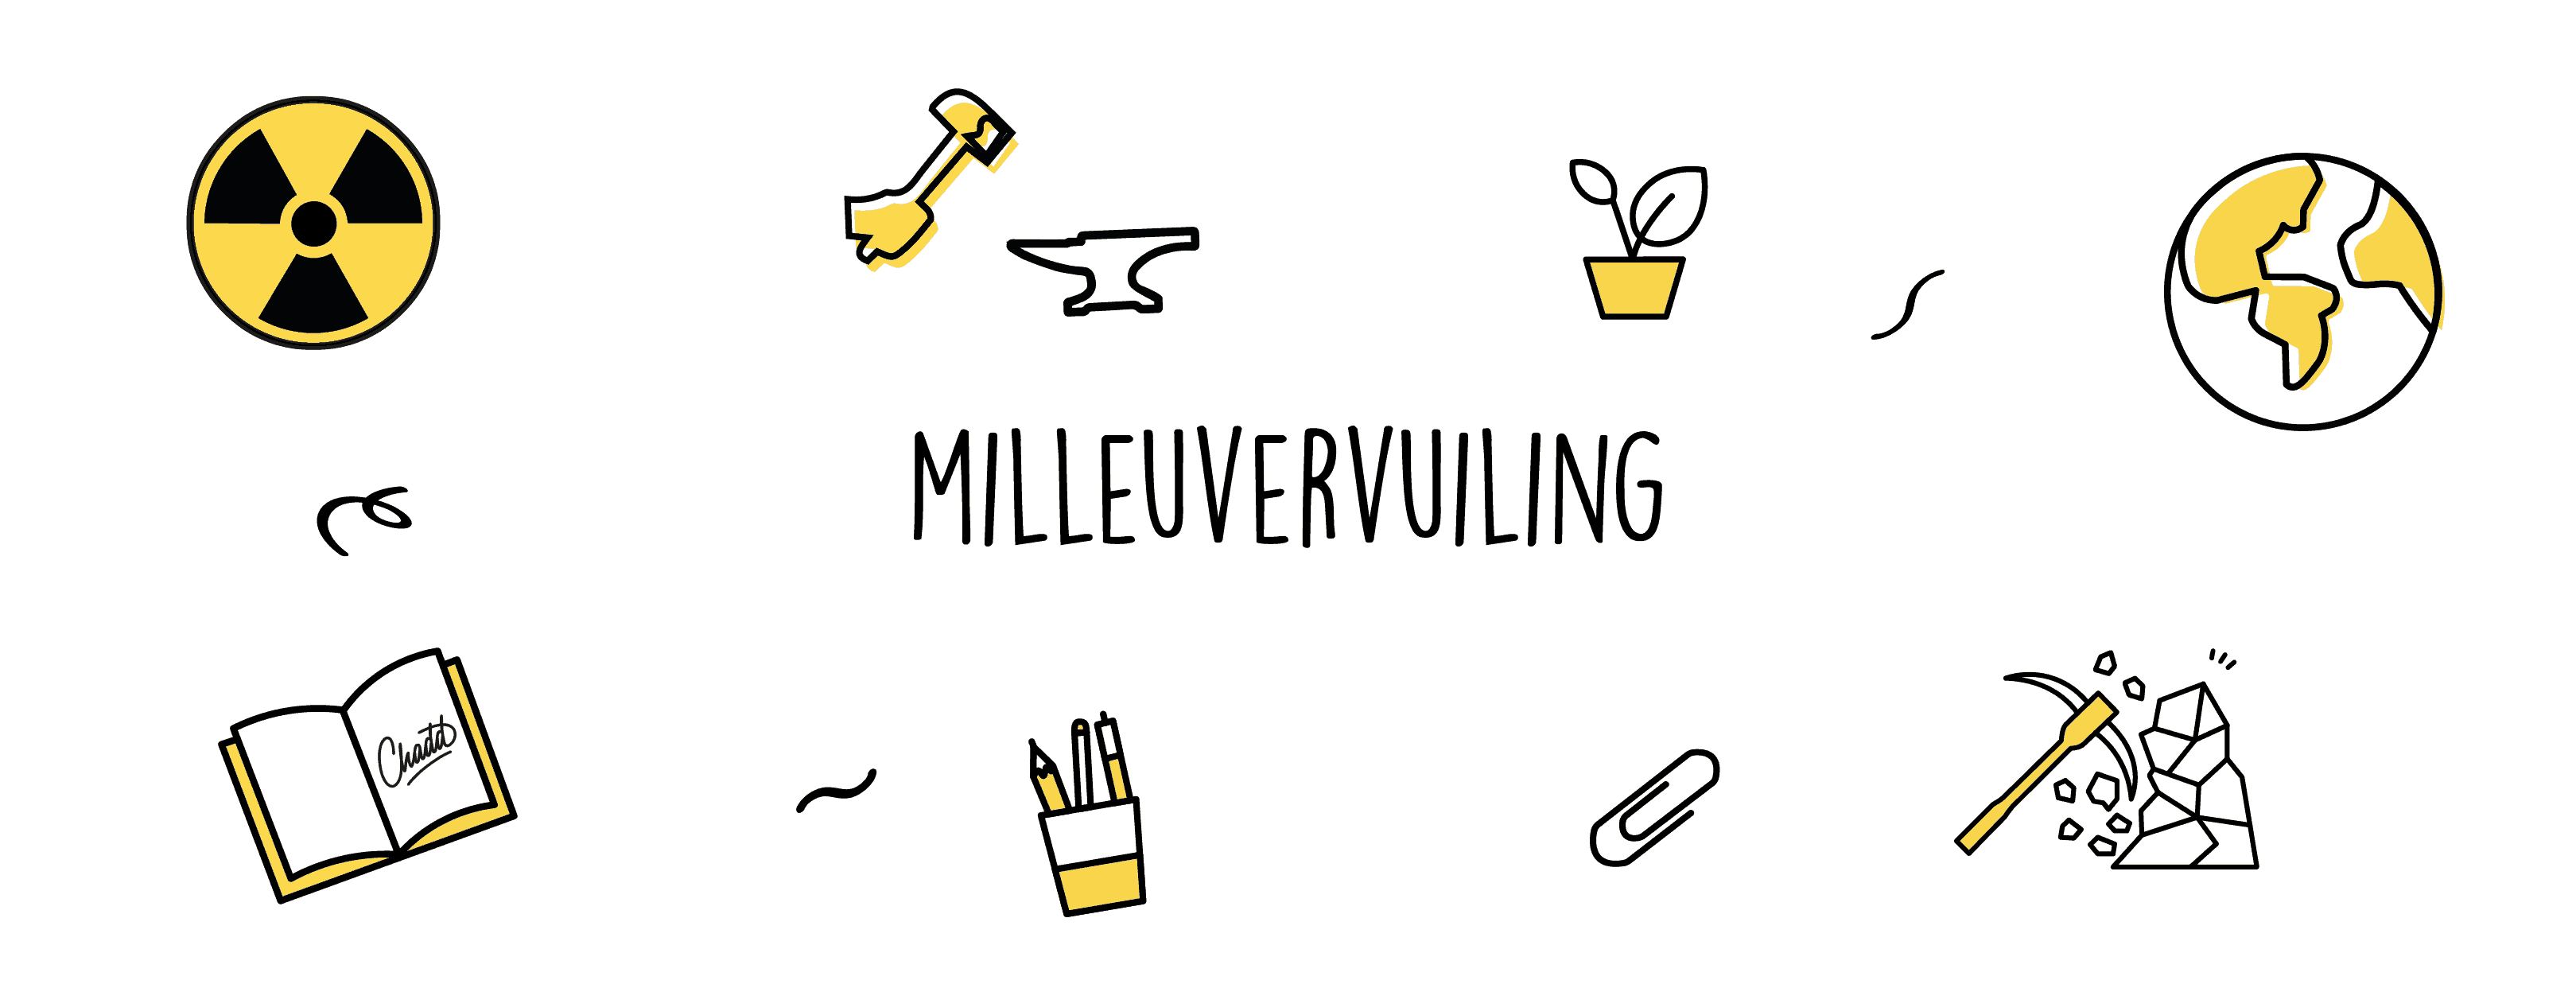 milleuvervuiling